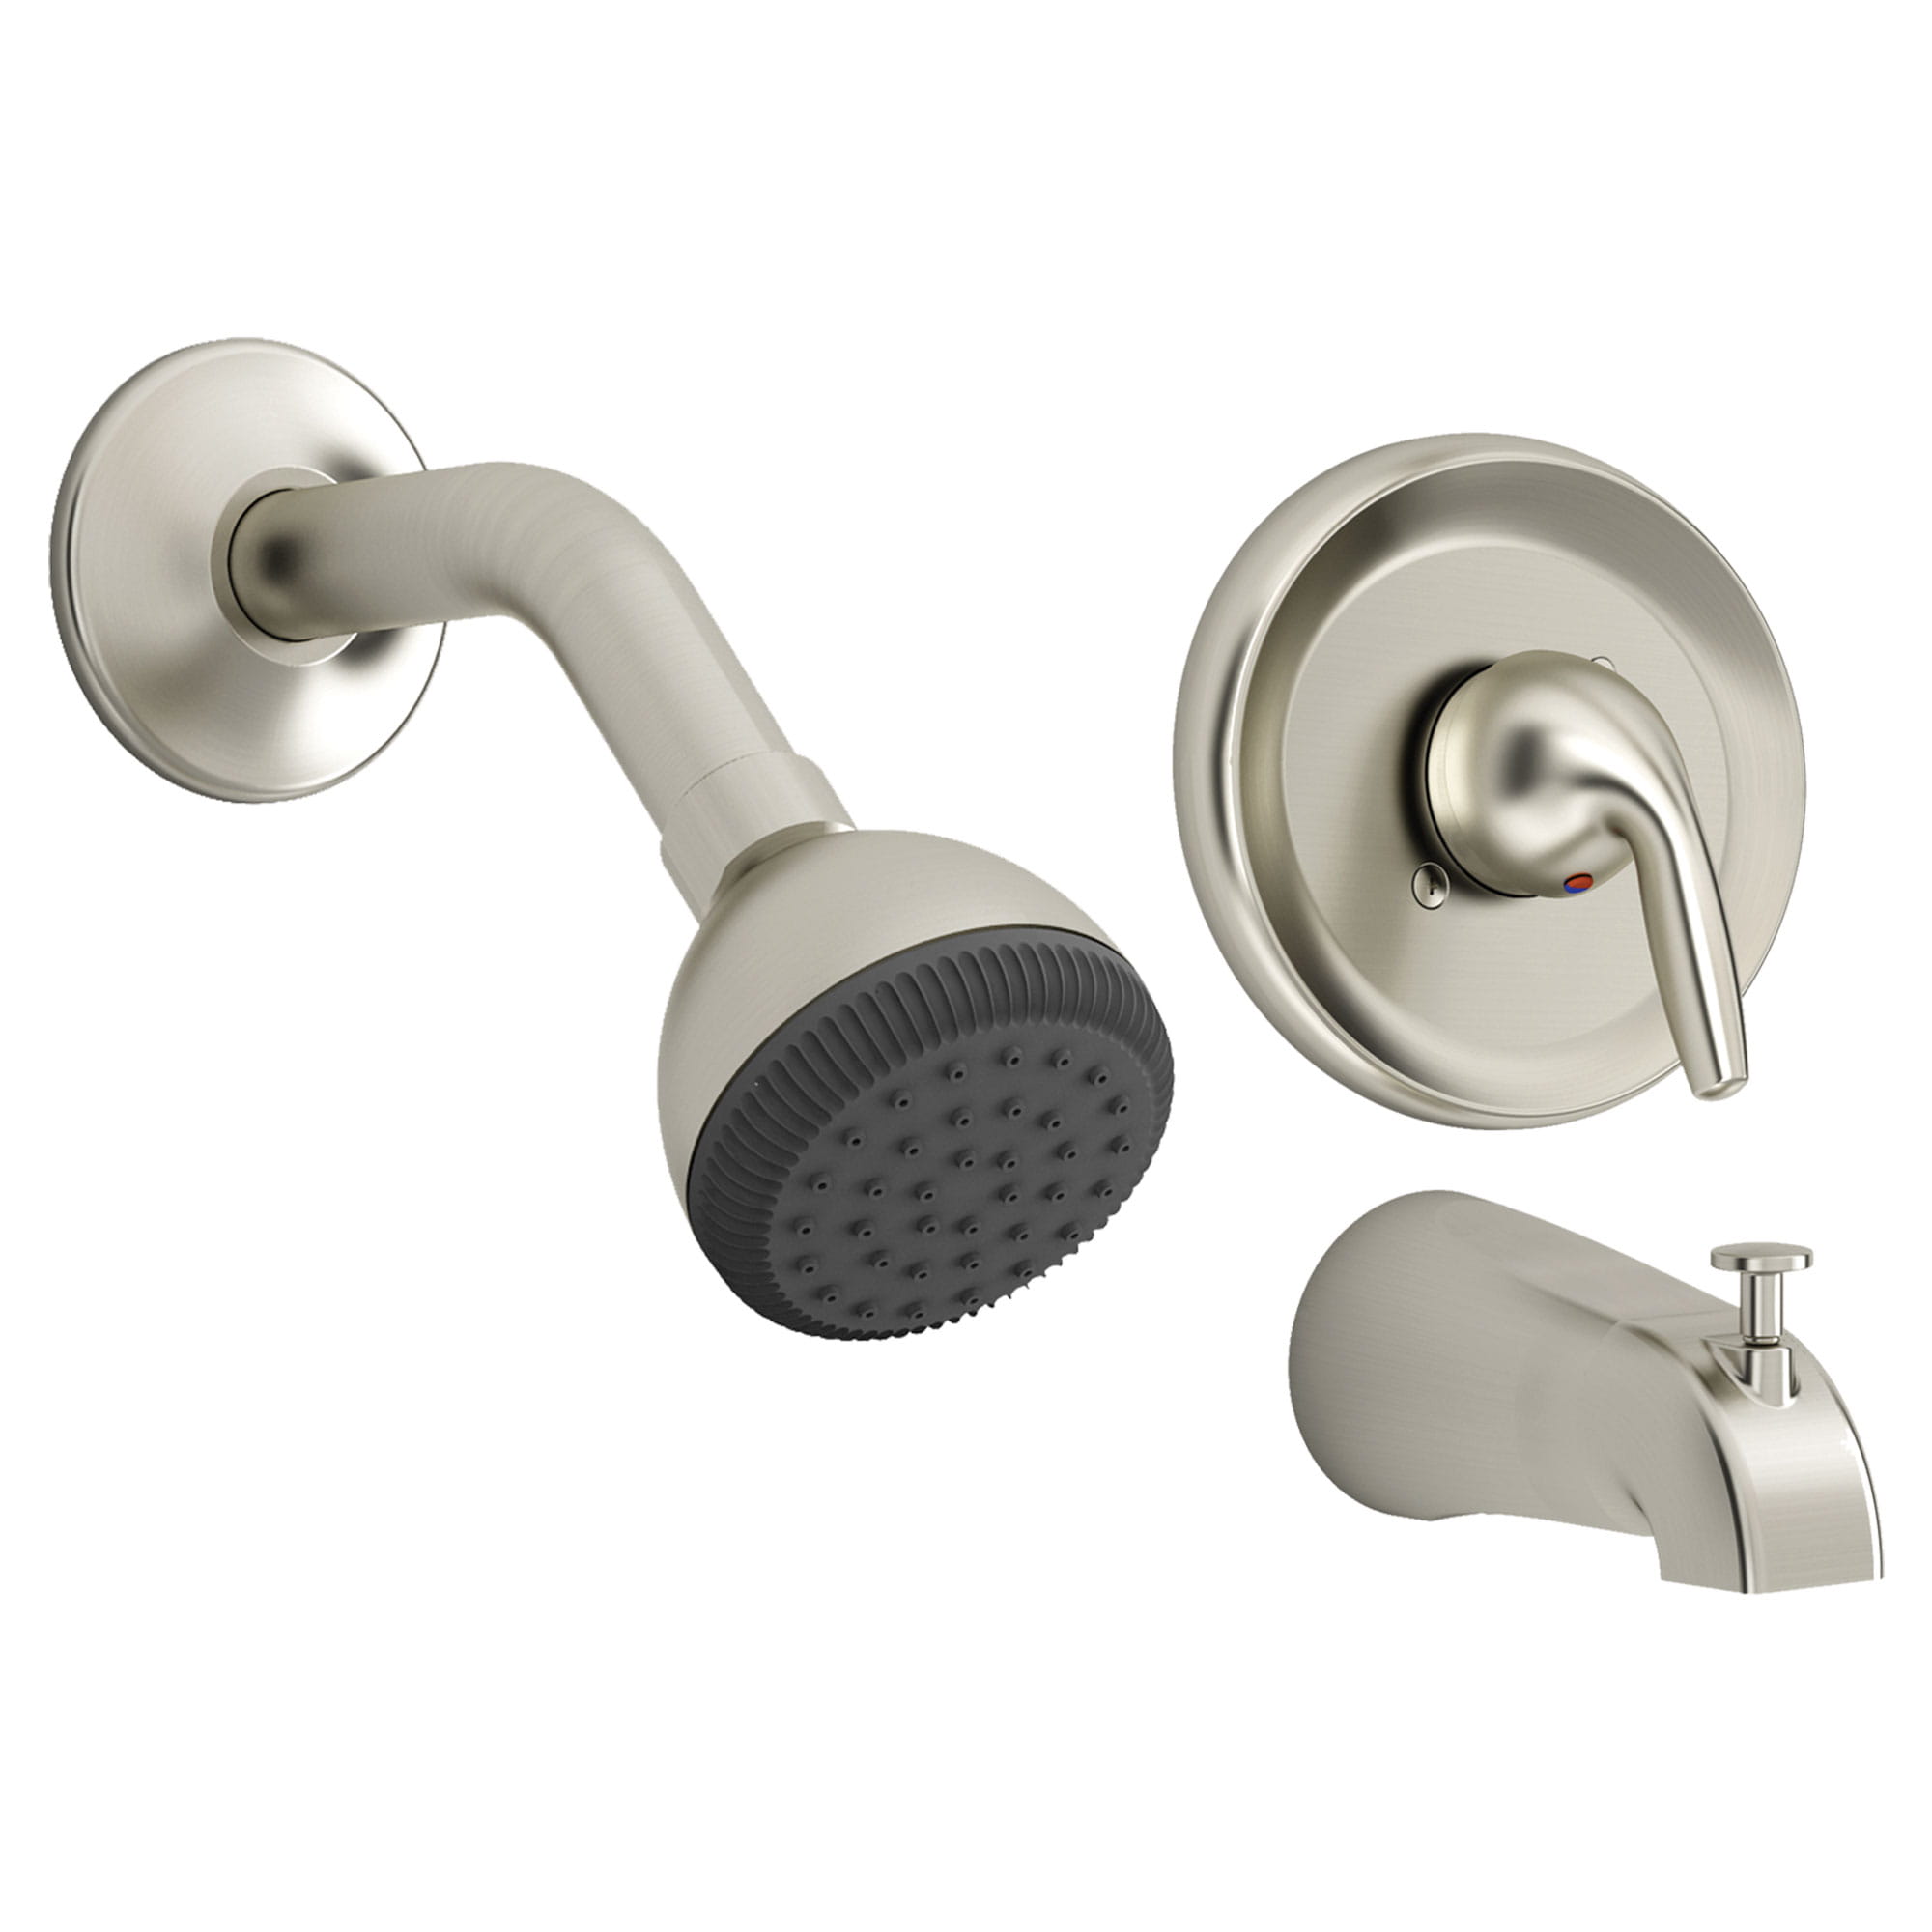 Jocelyn 25 GPM Tub and Shower Trim Kit with Ceramic Disc Valve Cartridge and Lever Handle   BRUSHED NICKEL